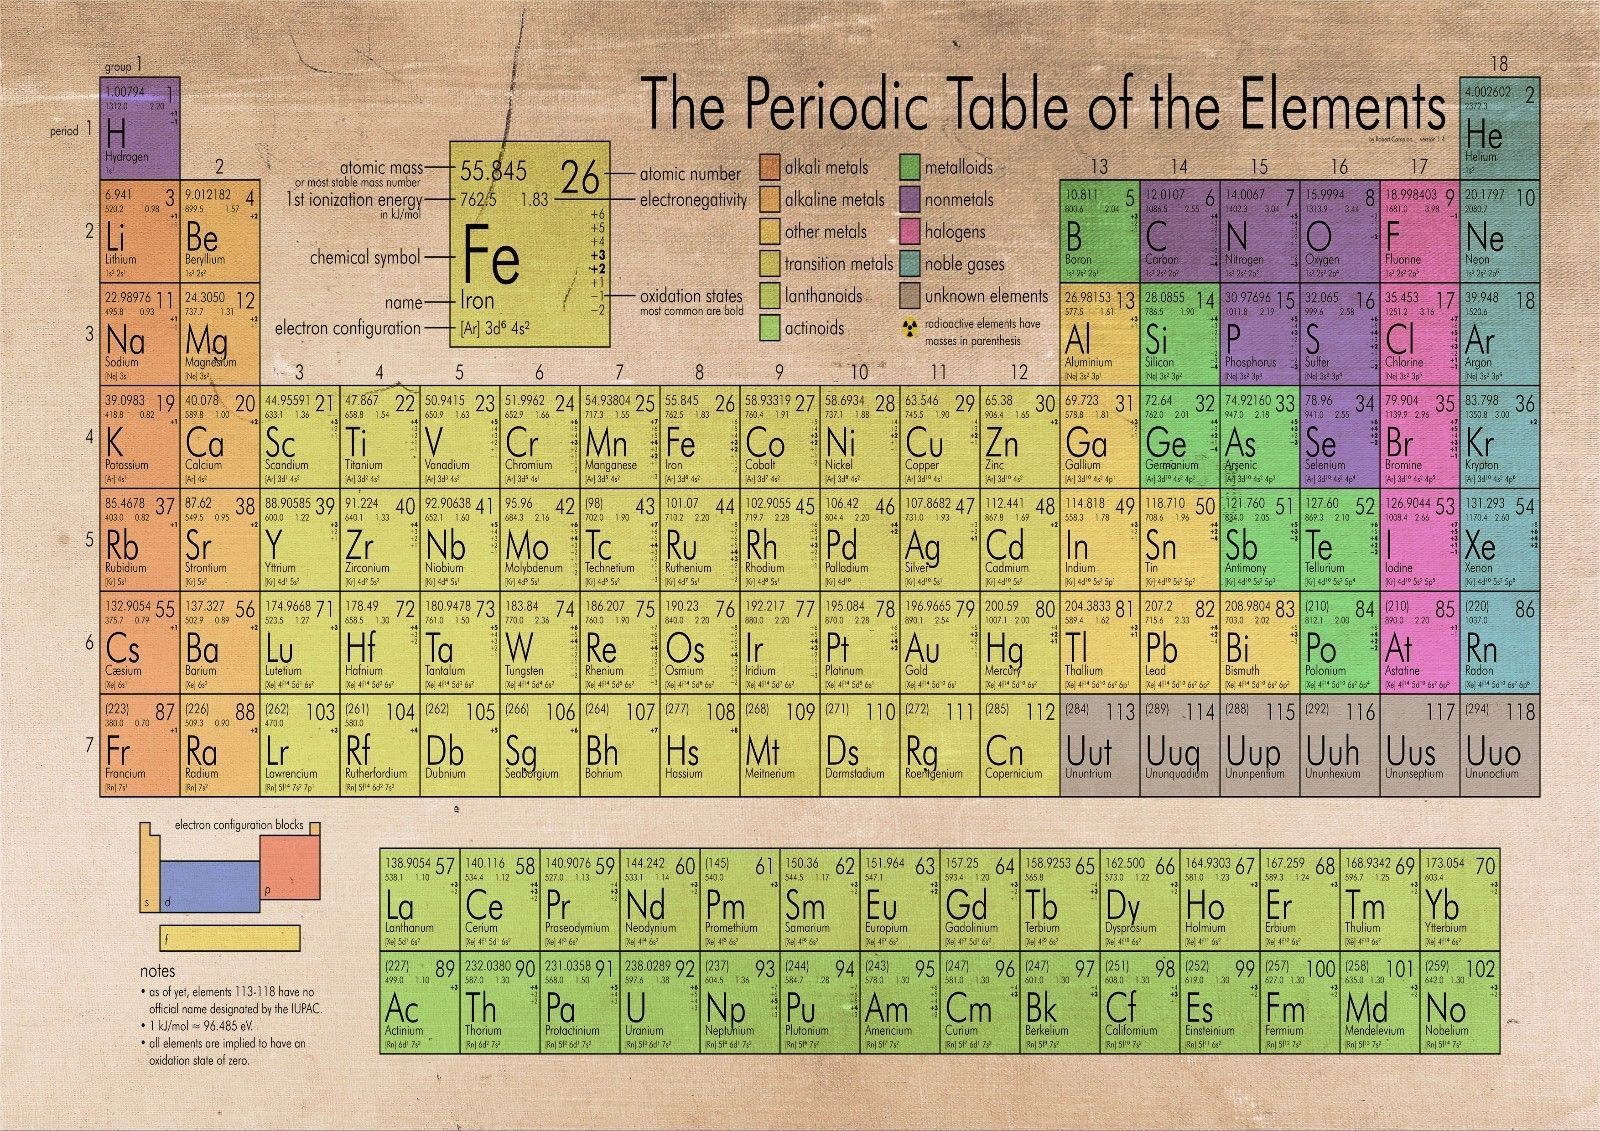 61261-the-periodic-table-of-the-elements-decor-wall-poster-print-8-95